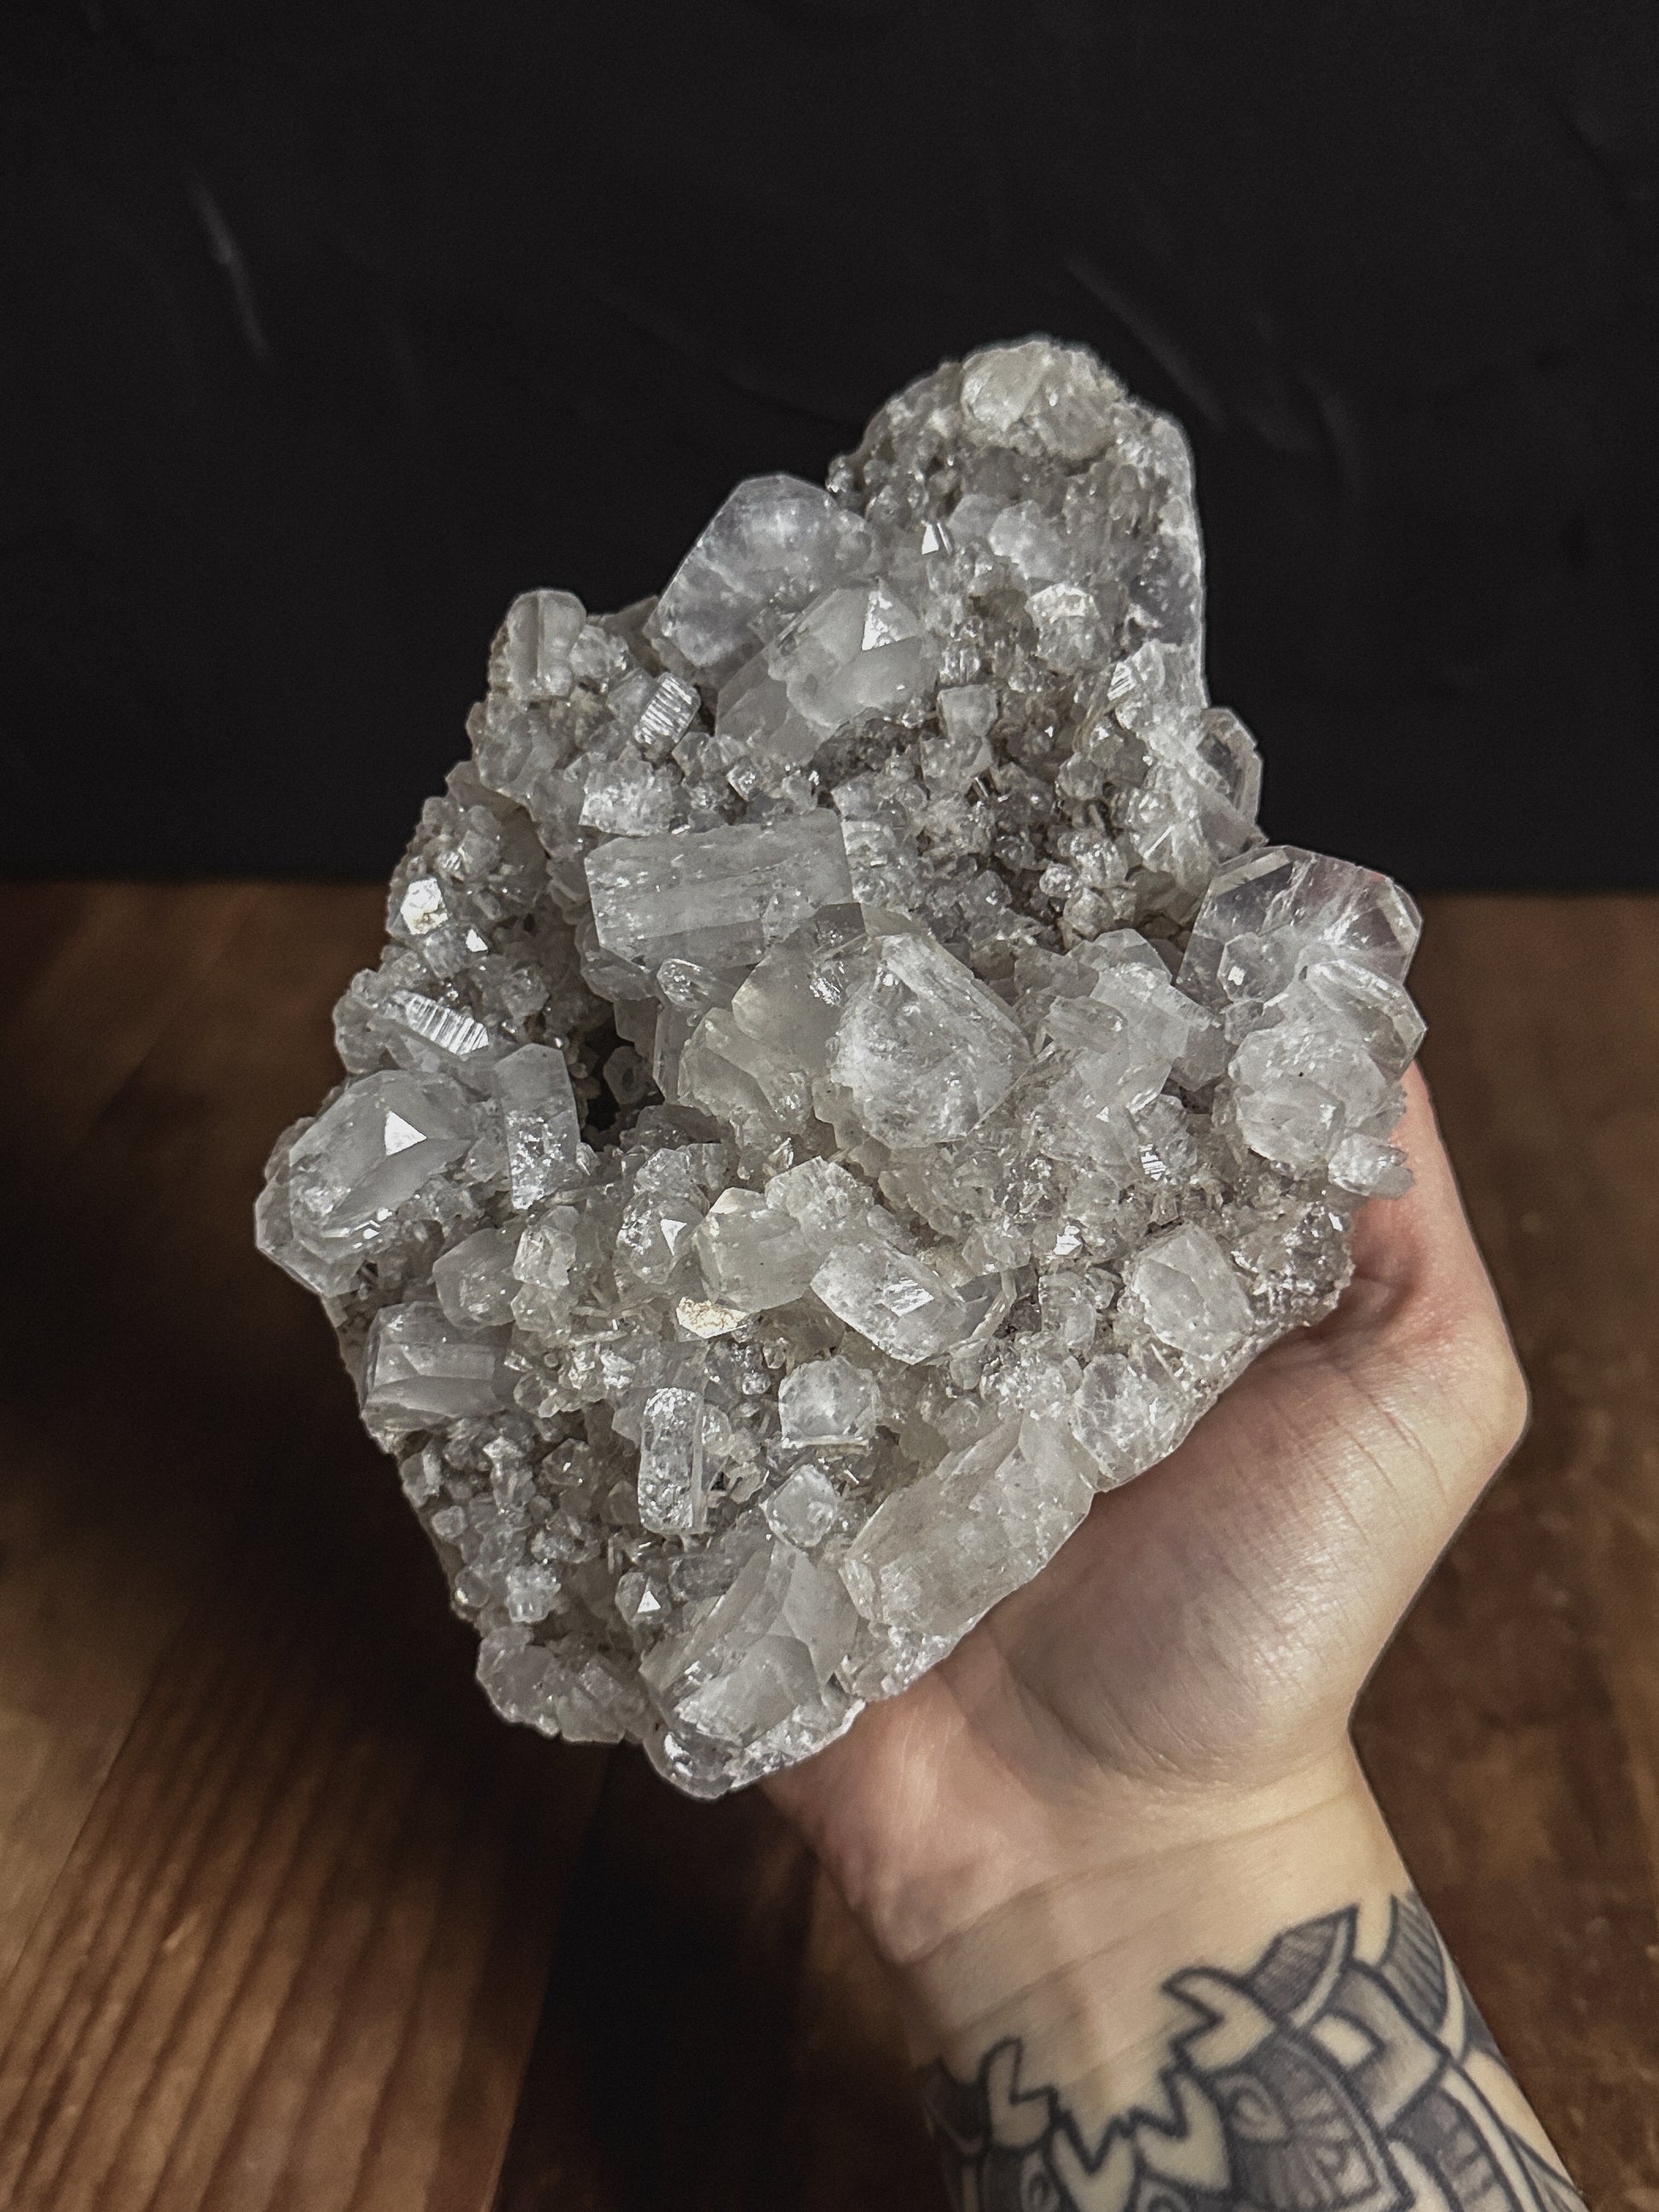 An exquisite Large Apophyllite Cluster, featuring sparkling, translucent crystals arranged in a mesmerizing formation. Perfect for adding natural elegance to any home decor or presenting as a thoughtful gift.